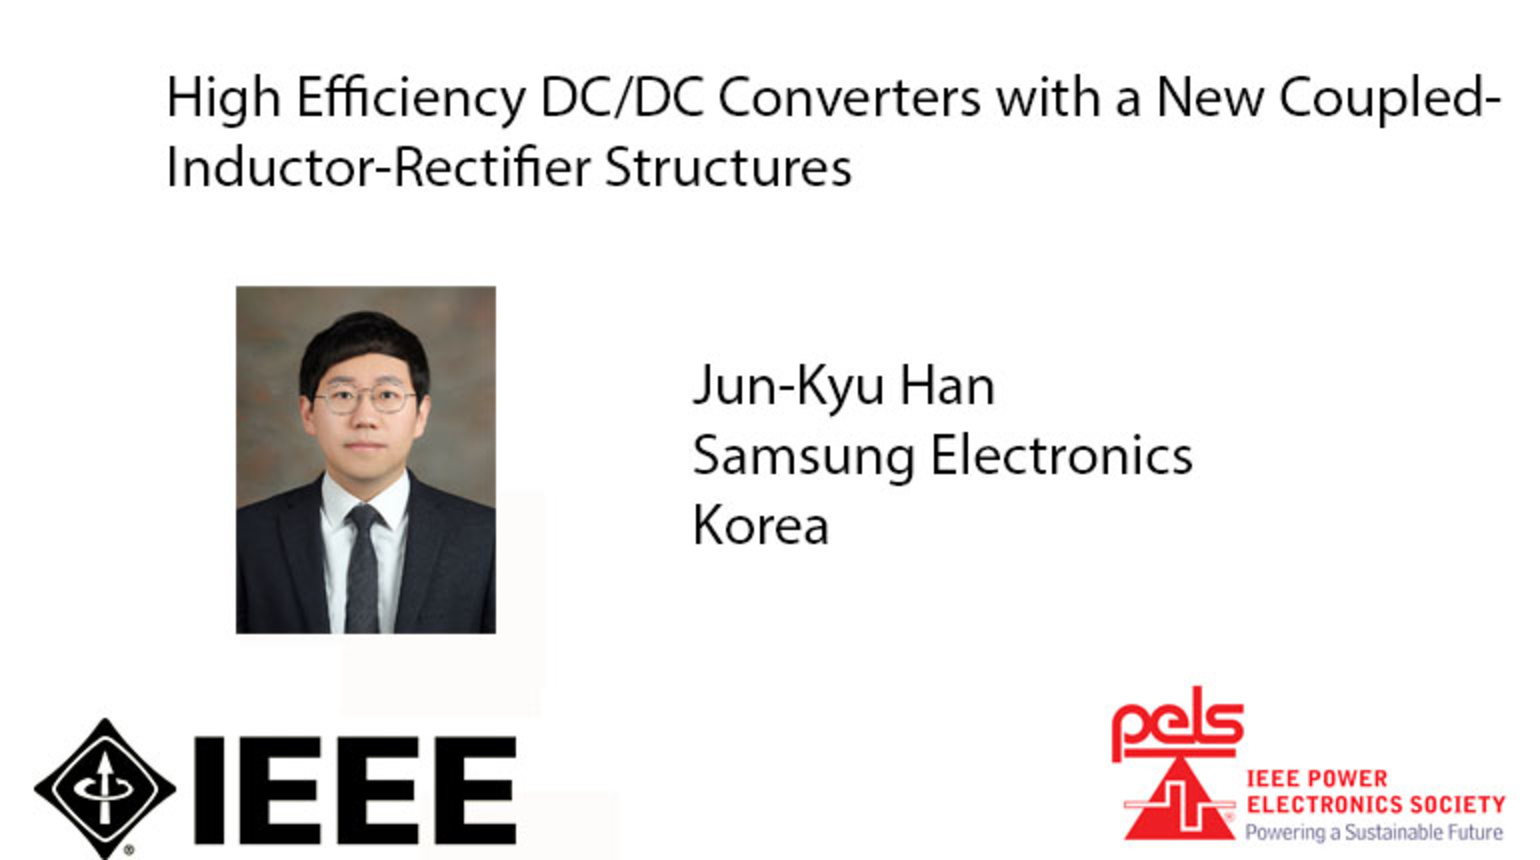 High Efficiency DC DC Converters with a New Coupled-Inductor-Rectifier Structures-video